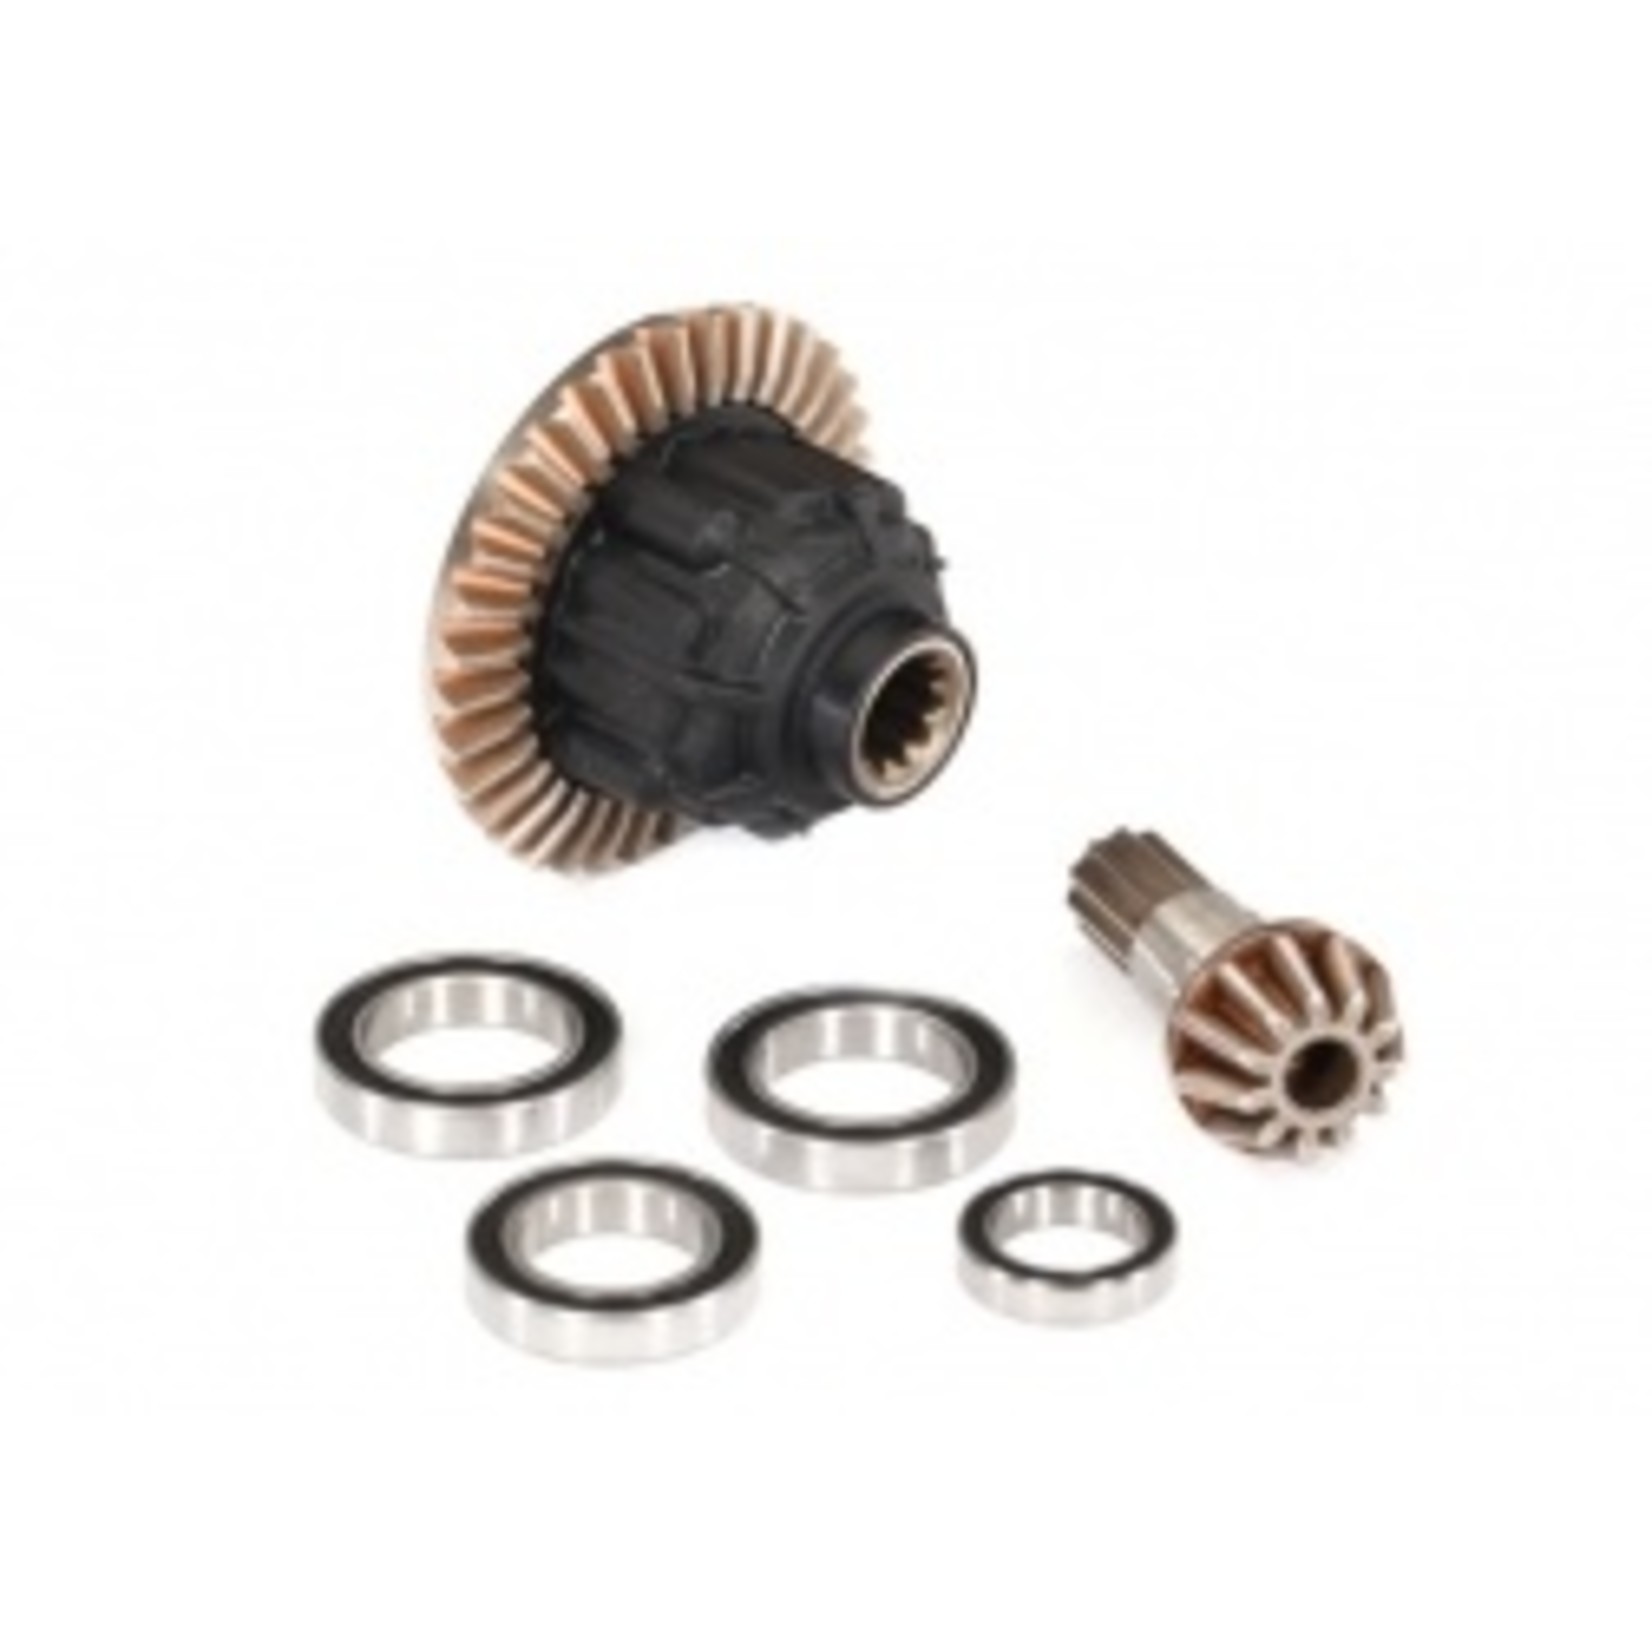 Traxxas 7880 Differential, front, complete (fits X-Maxx® 8s)